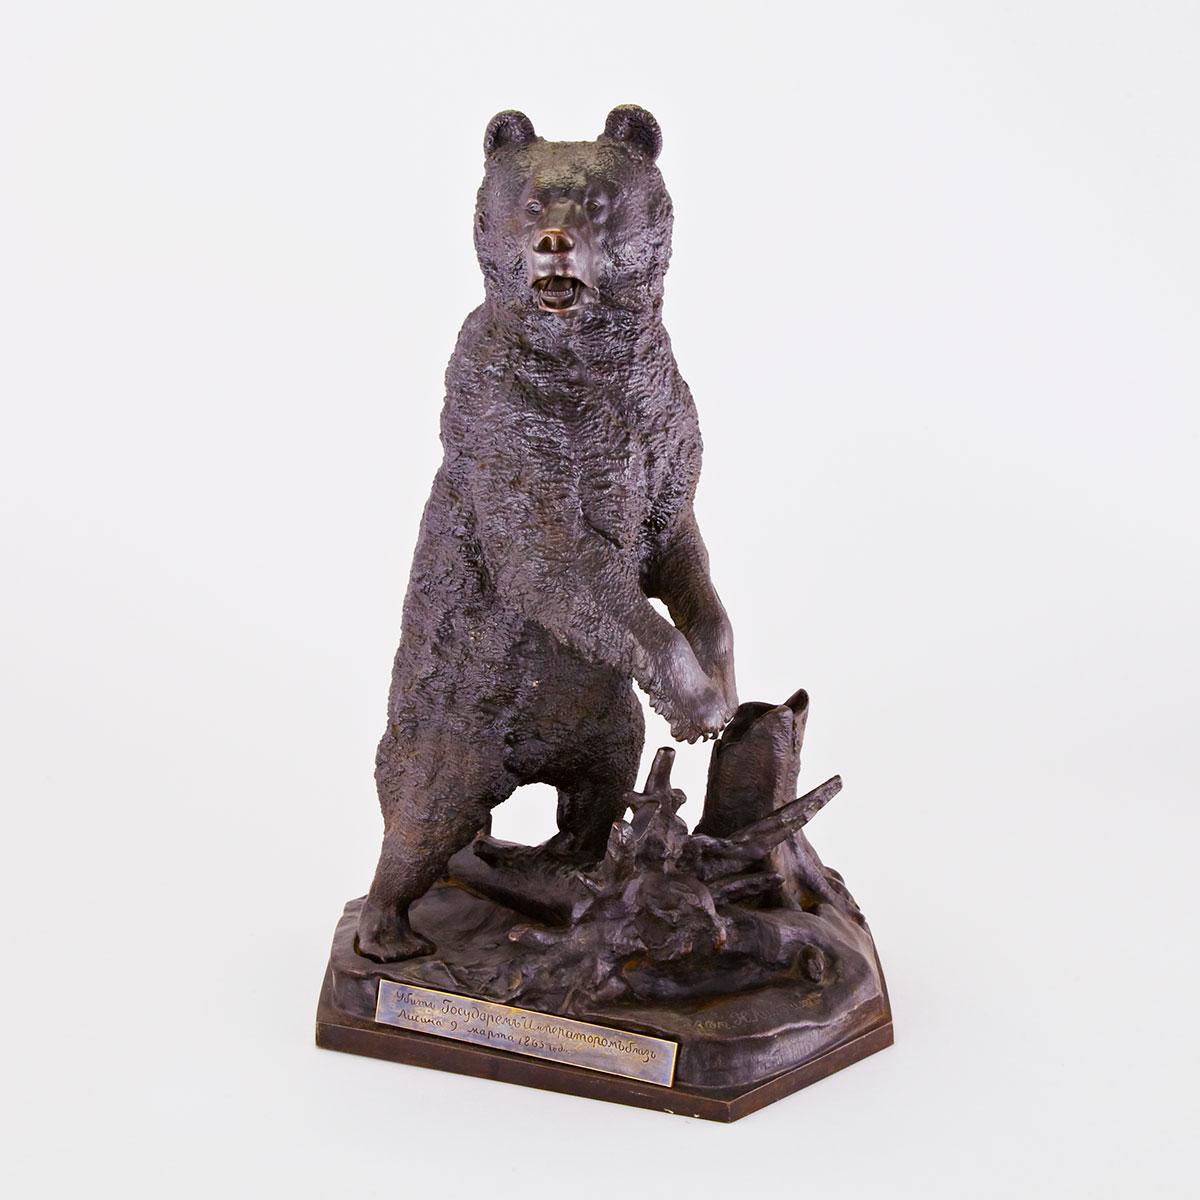 Russian Patinated Cast Iron Figure of a Bear after the model by Nikolaï Ivanovich Lieberich (1828-1883), 1903